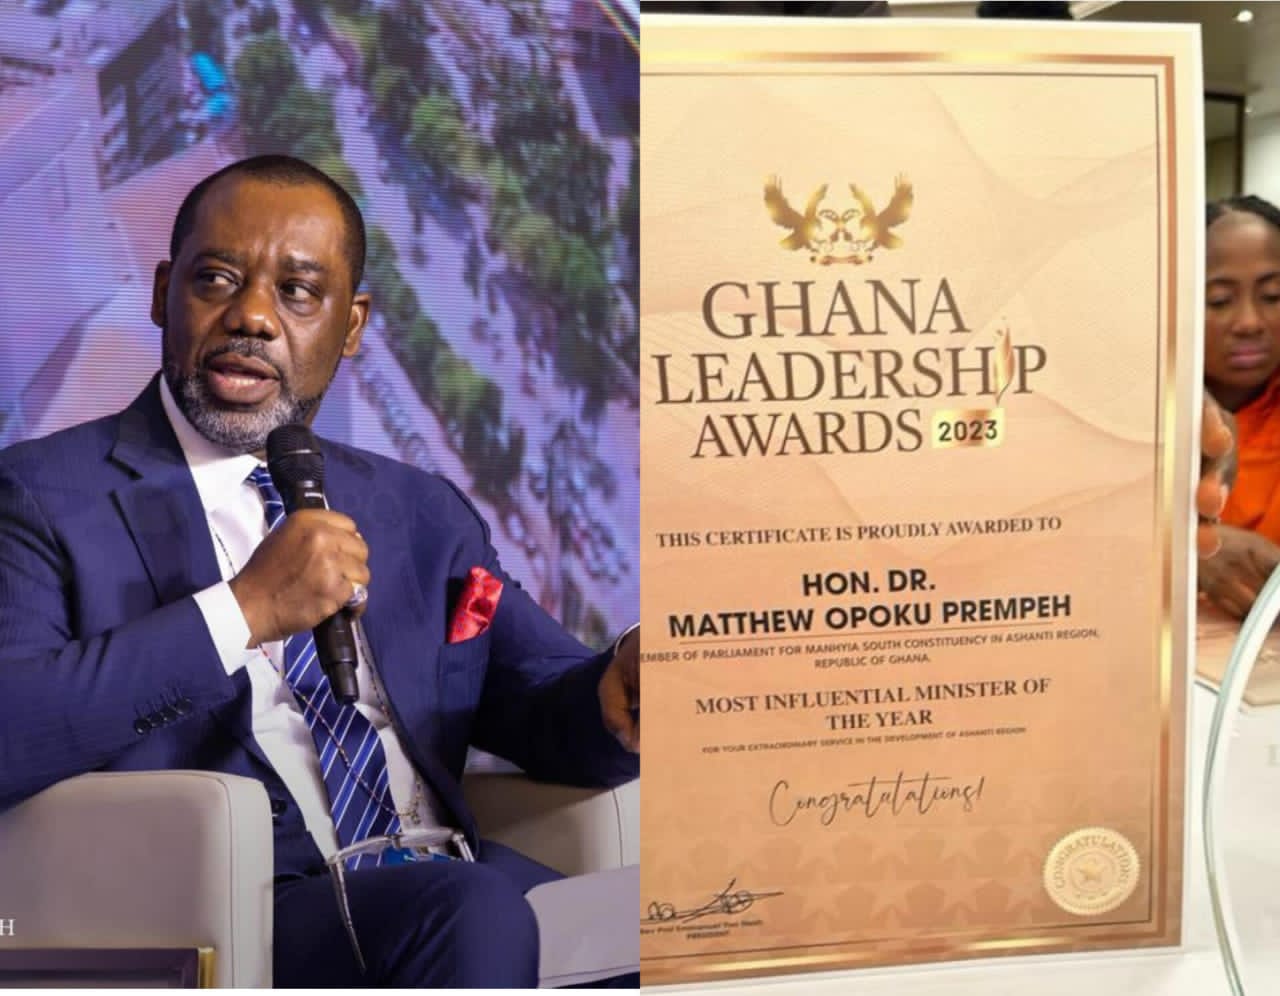 Opoku Prempeh is Most Influential Minister 2023 – Ghana Leadership Awards